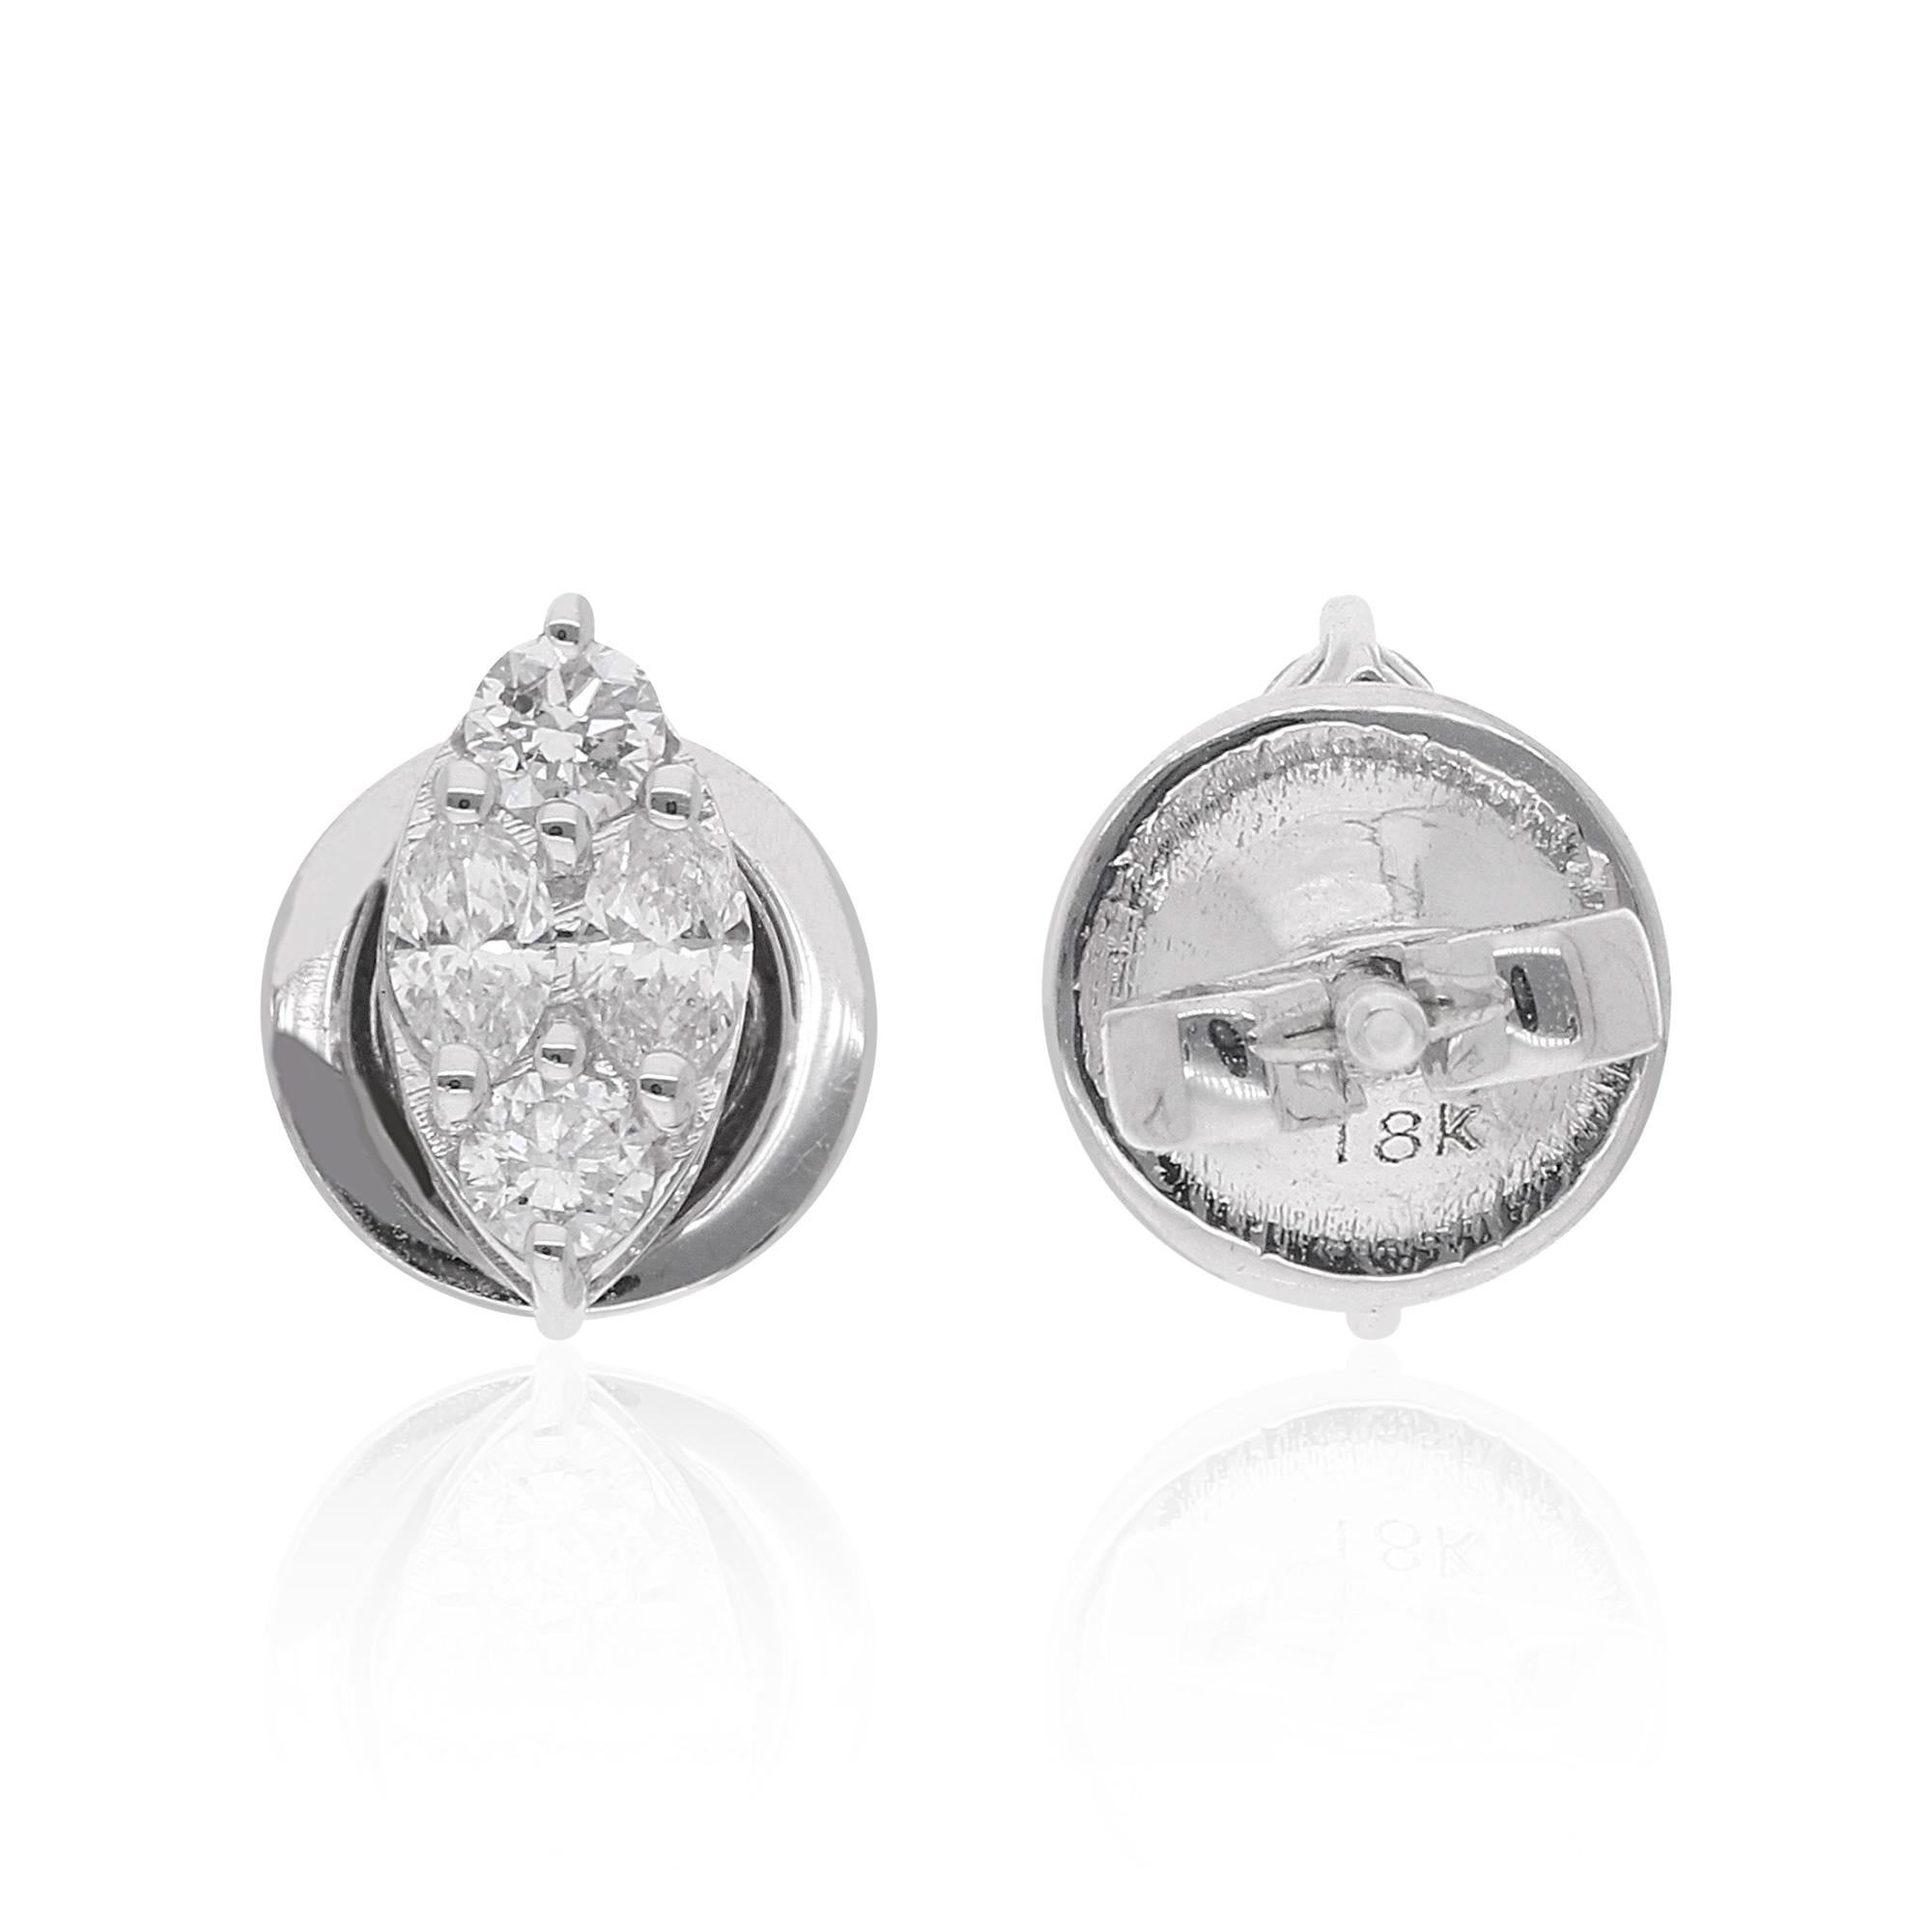 Set in 18 karat white gold, the metal of choice for its timeless appeal and lustrous finish, these earrings exude an air of sophistication and refinement. The cool, silvery hue of white gold complements the diamonds perfectly, creating a striking